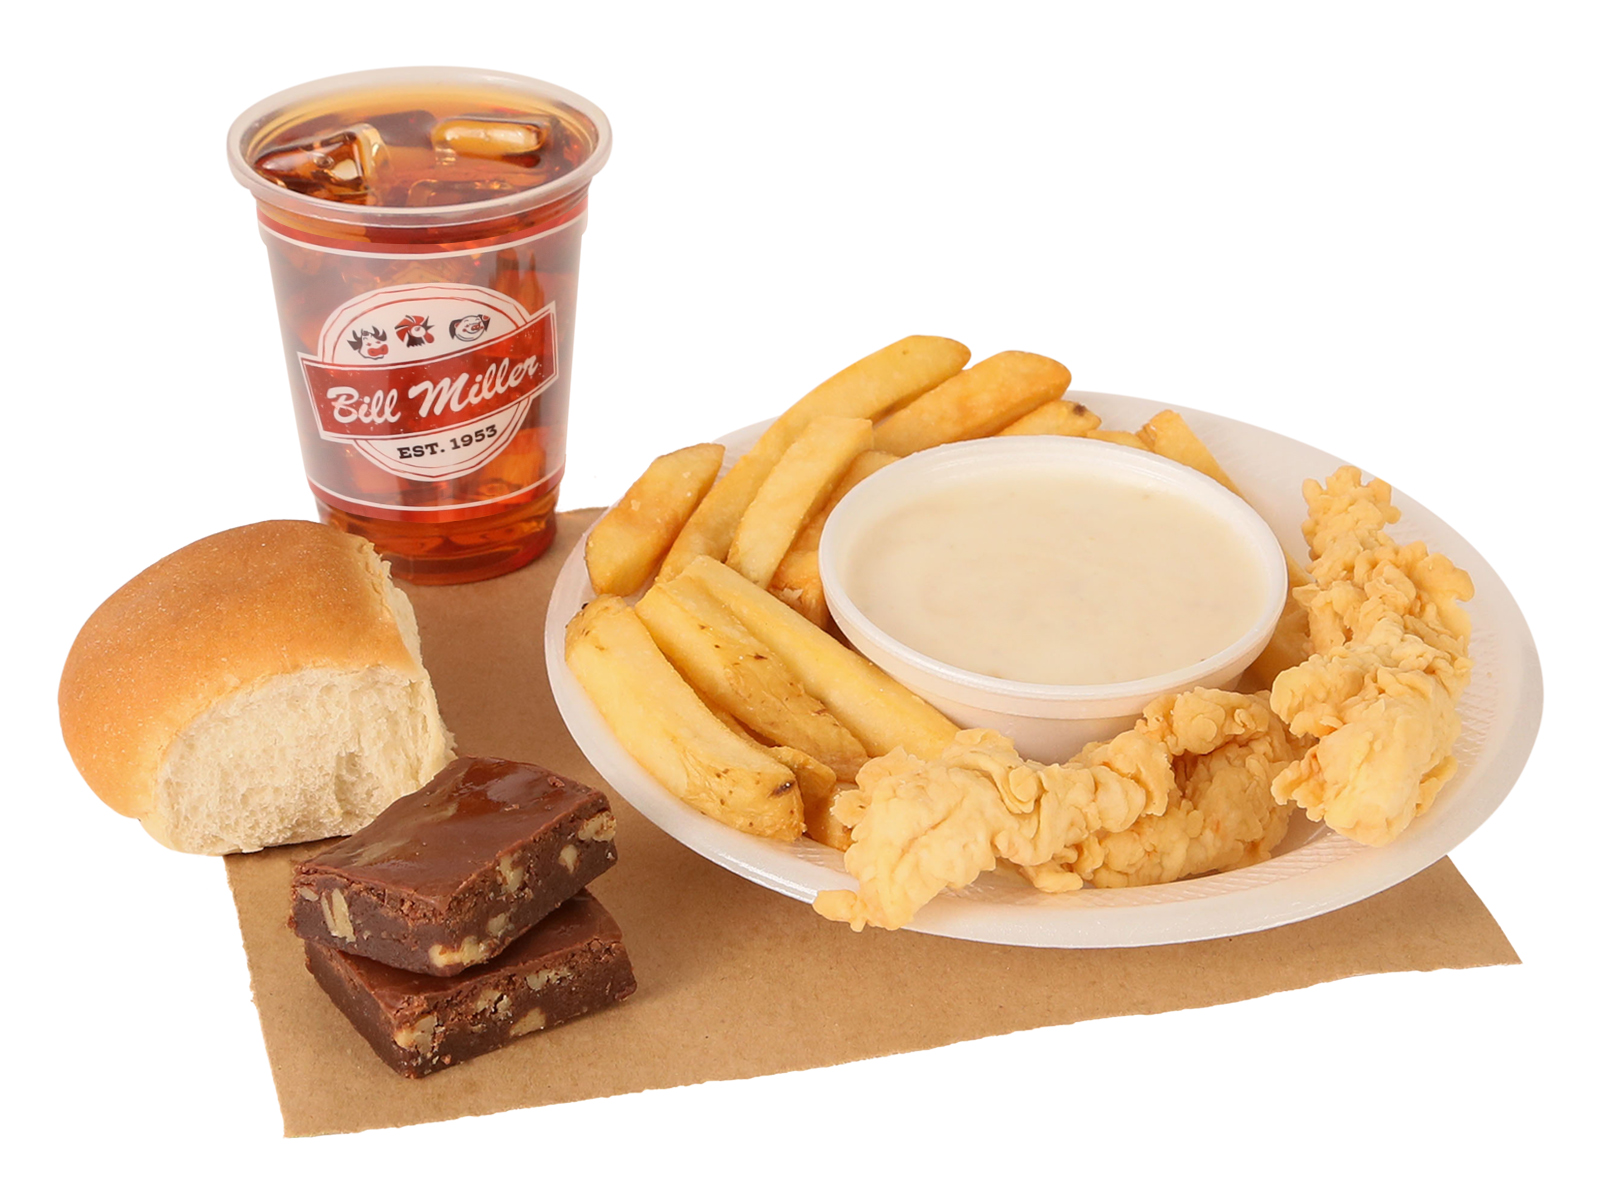 Buckaroos 2pc. Fried Chicken Tenders served with french fries, small tea, & 2 brownies